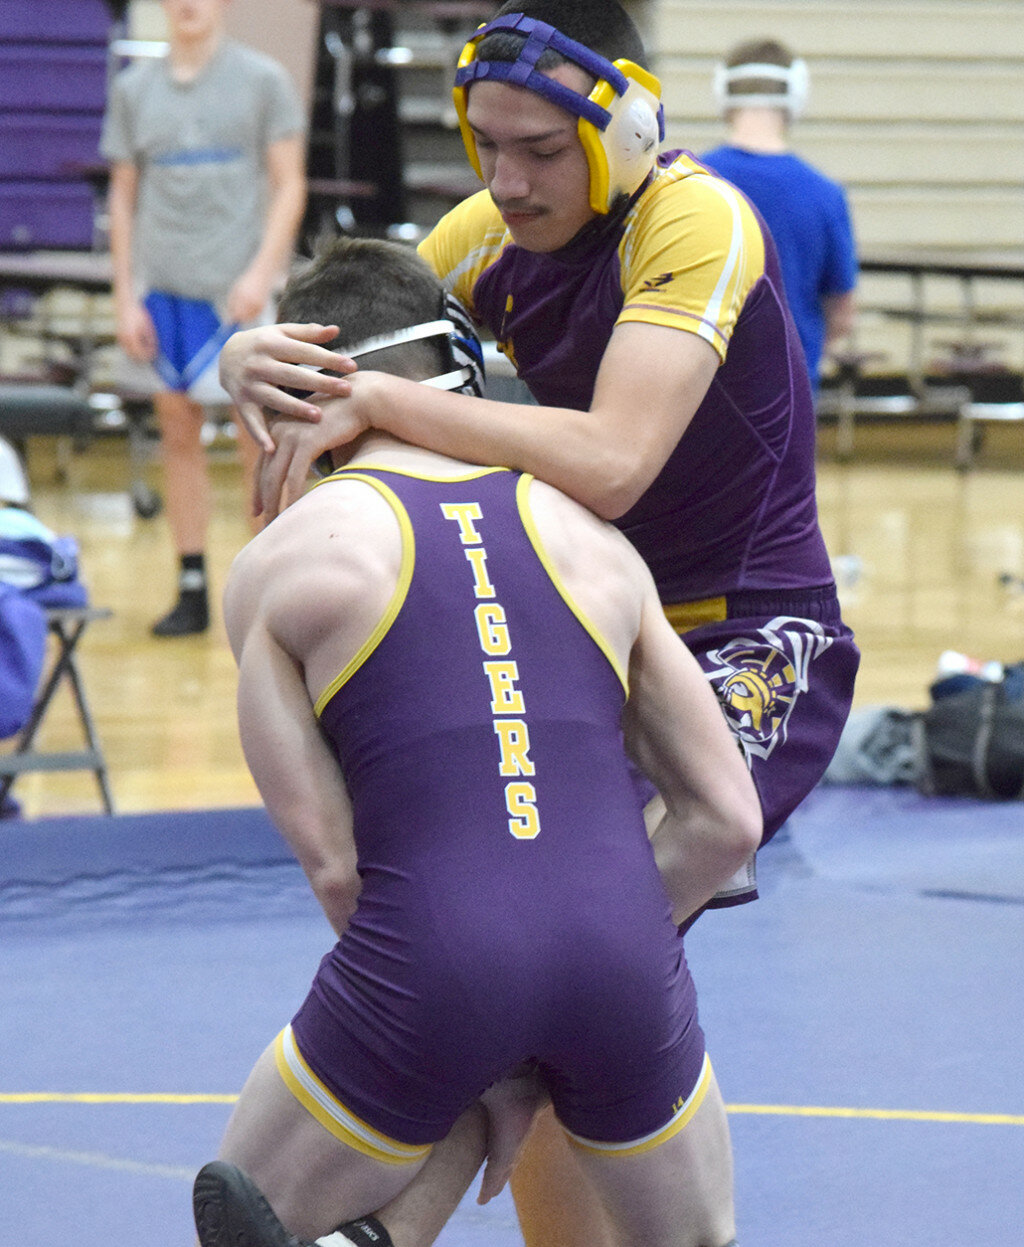 Mendota’s Jose Hermosillo, right, tries to gain control of his Sherrard opponent during a 138-pound wrestling bout on Jan. 11 at the MHS gym. (Reporter photo)